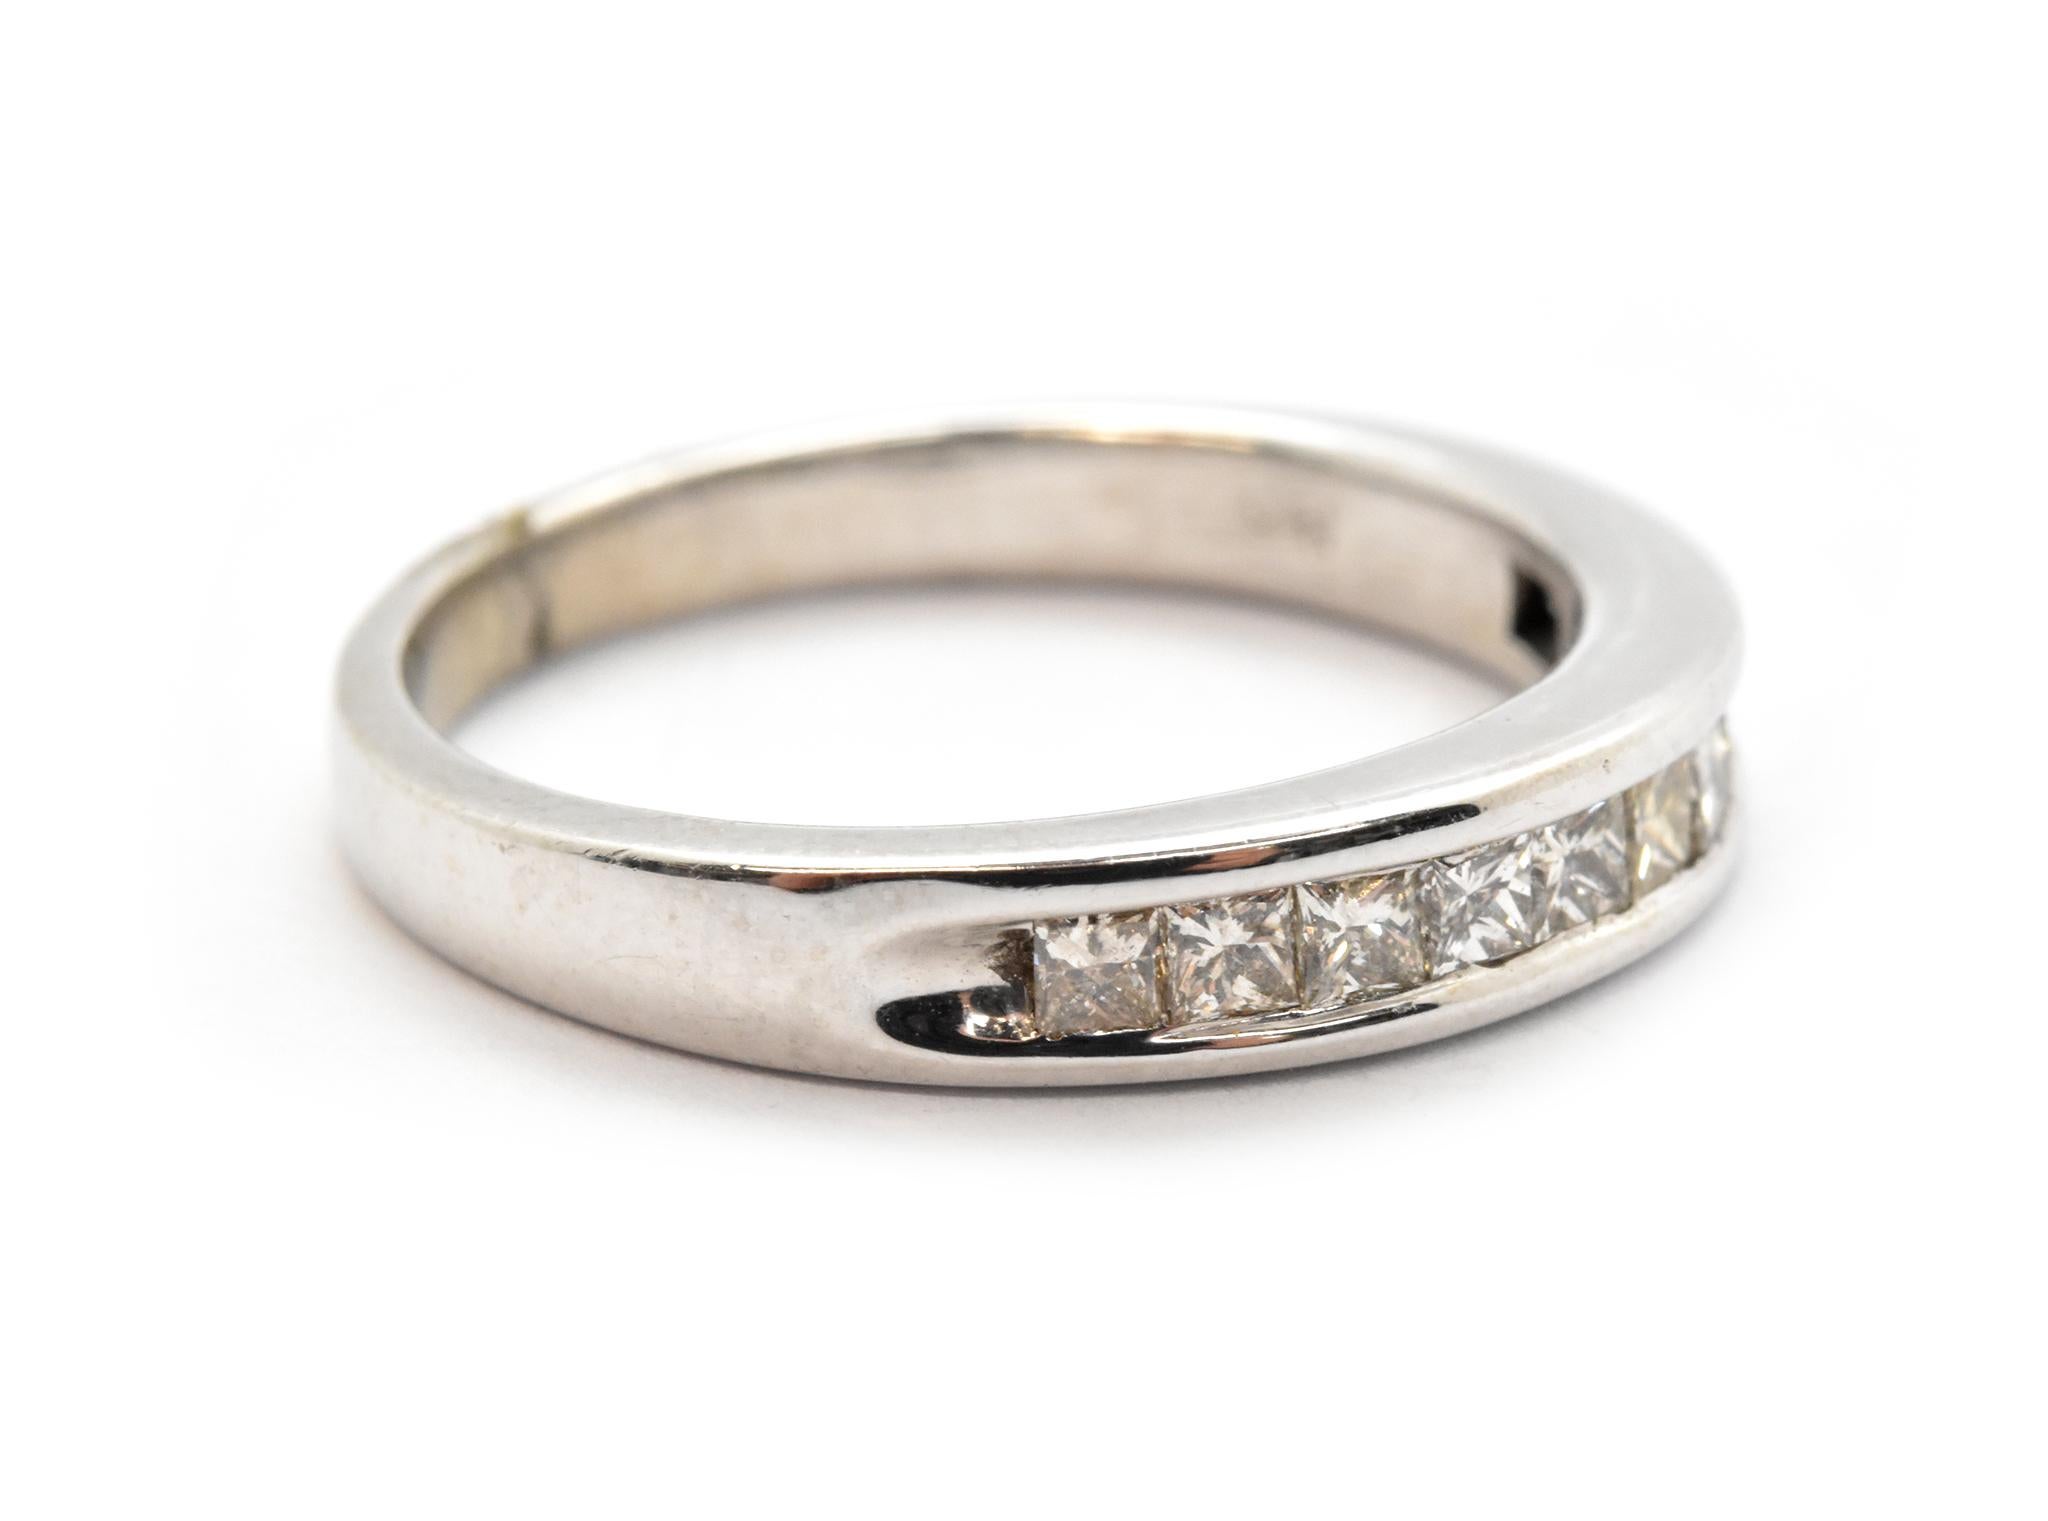 This band features a row of channel-set, princess-cut diamonds set into 14k white gold. The diamonds have a total weight of 0.50ct, and they are graded I in color and SI in clarity. The band measures 4mm wide, and it weighs 3.5 grams. It is size 7.